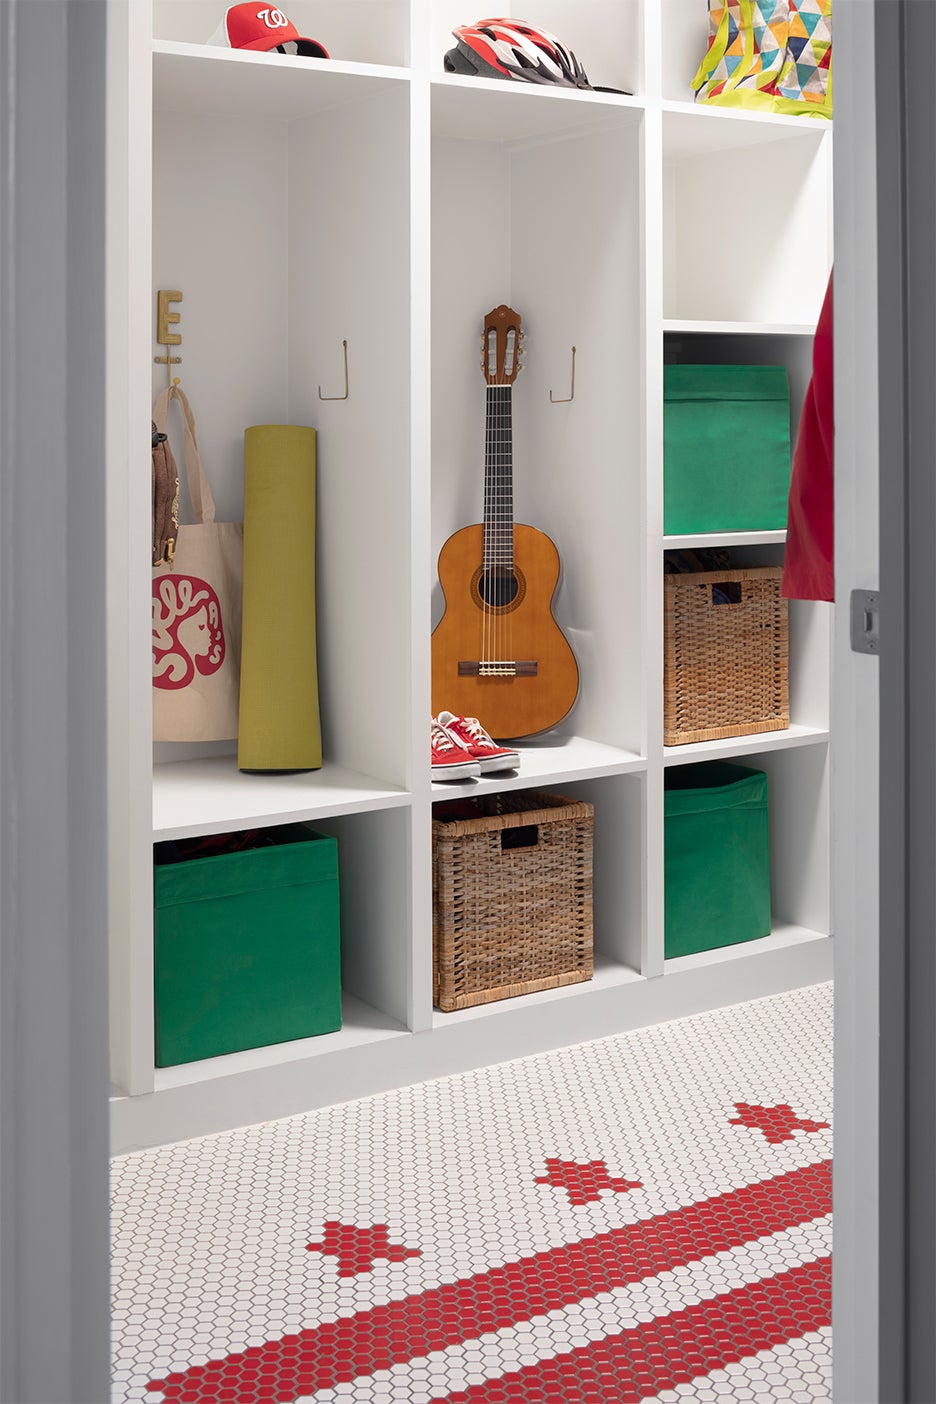 Mudroom with American flag penny tile design